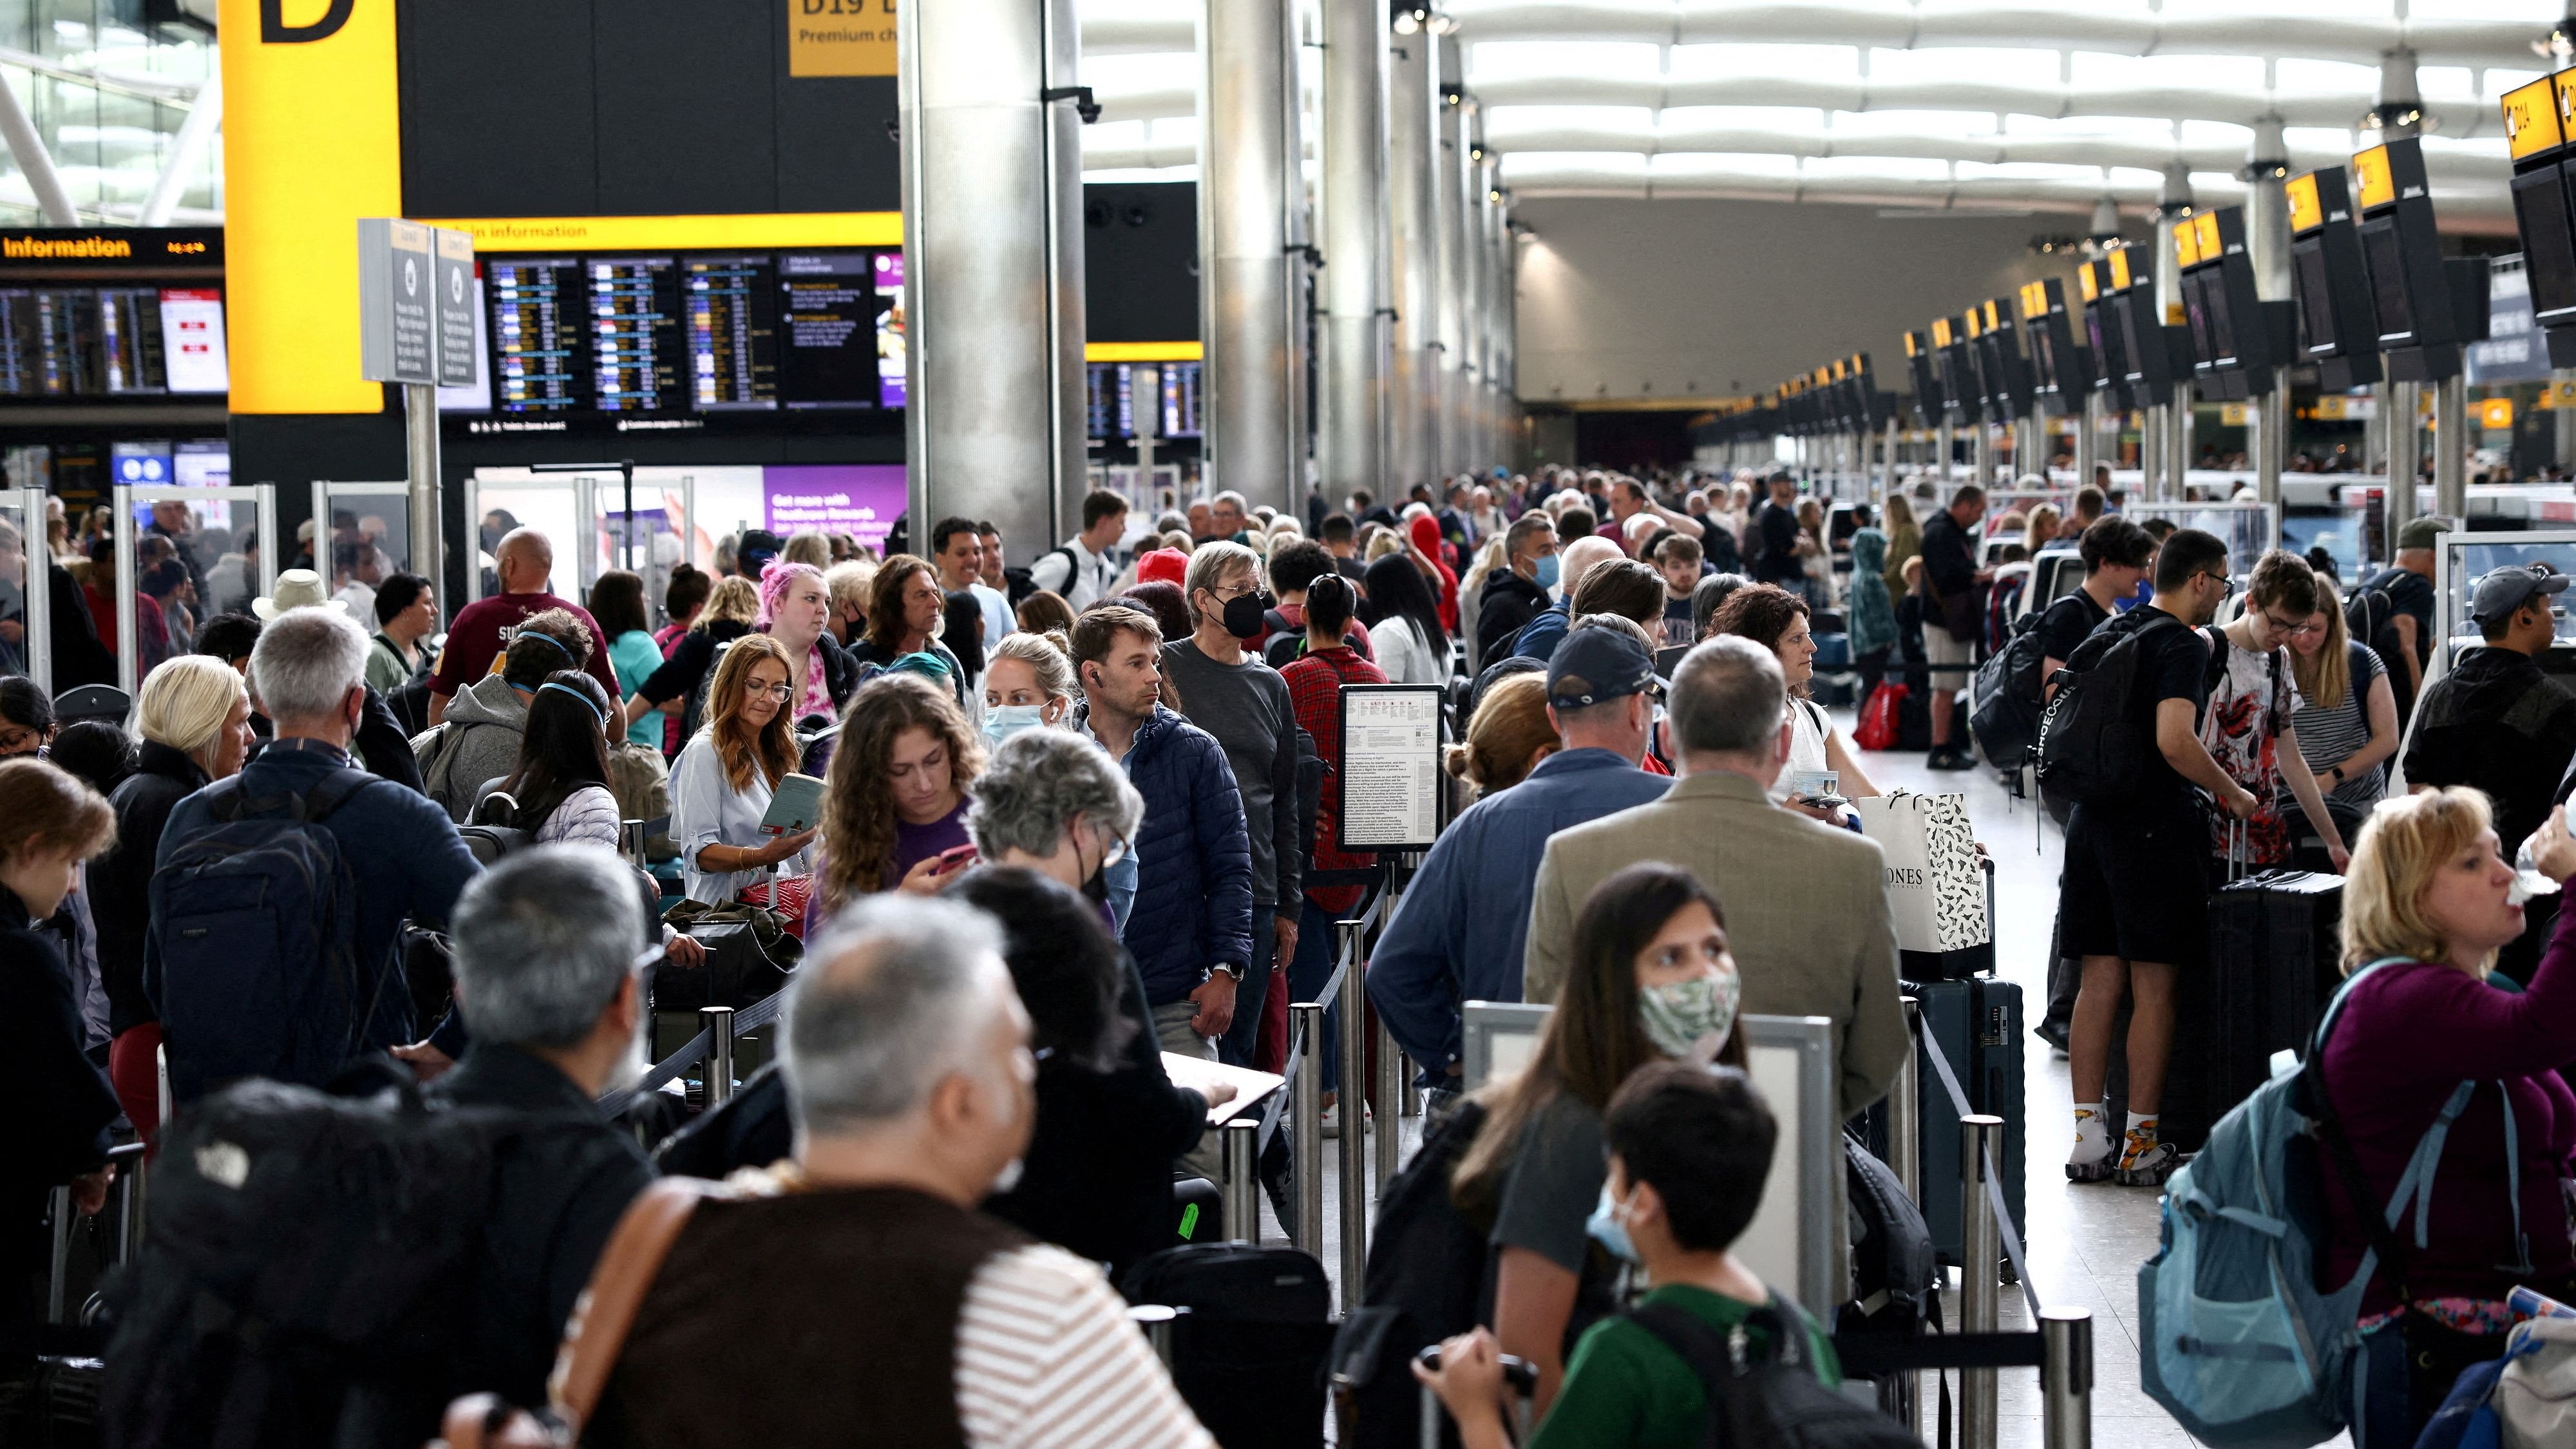 After two solid years of pandemic-induced staycations, travel has come roaring back in Europe, and peak summer vacation season is in full swing. Credit: Reuters photo